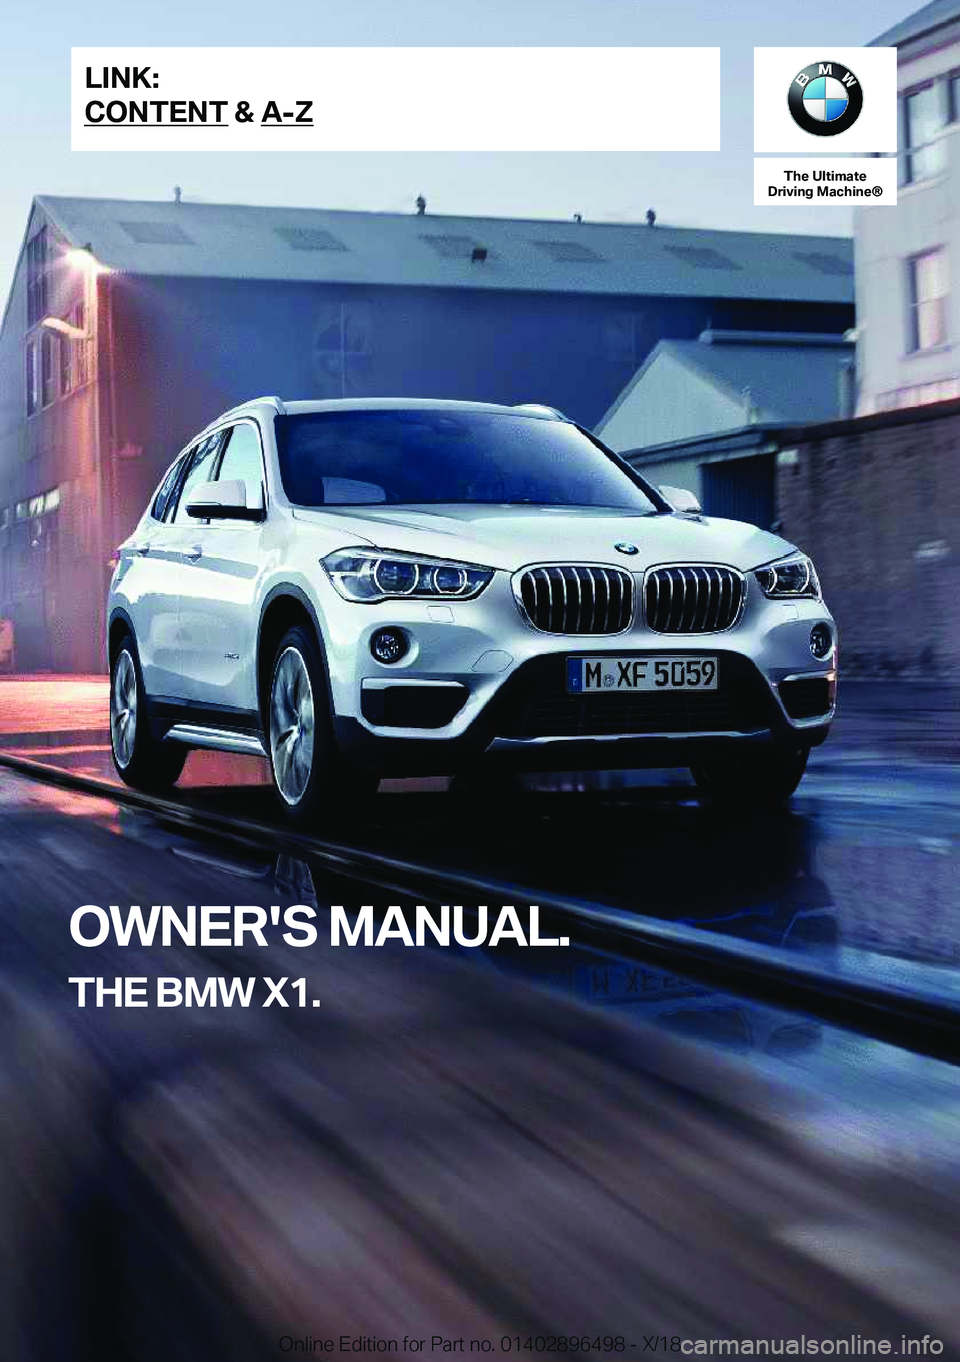 BMW X1 2019  Owners Manual �T�h�e��U�l�t�i�m�a�t�e
�D�r�i�v�i�n�g��M�a�c�h�i�n�e�n
�O�W�N�E�R�'�S��M�A�N�U�A�L�.
�T�H�E��B�M�W��X�1�.�L�I�N�K�:
�C�O�N�T�E�N�T��&��A�-�Z�O�n�l�i�n�e��E�d�i�t�i�o�n��f�o�r��P�a�r�t�